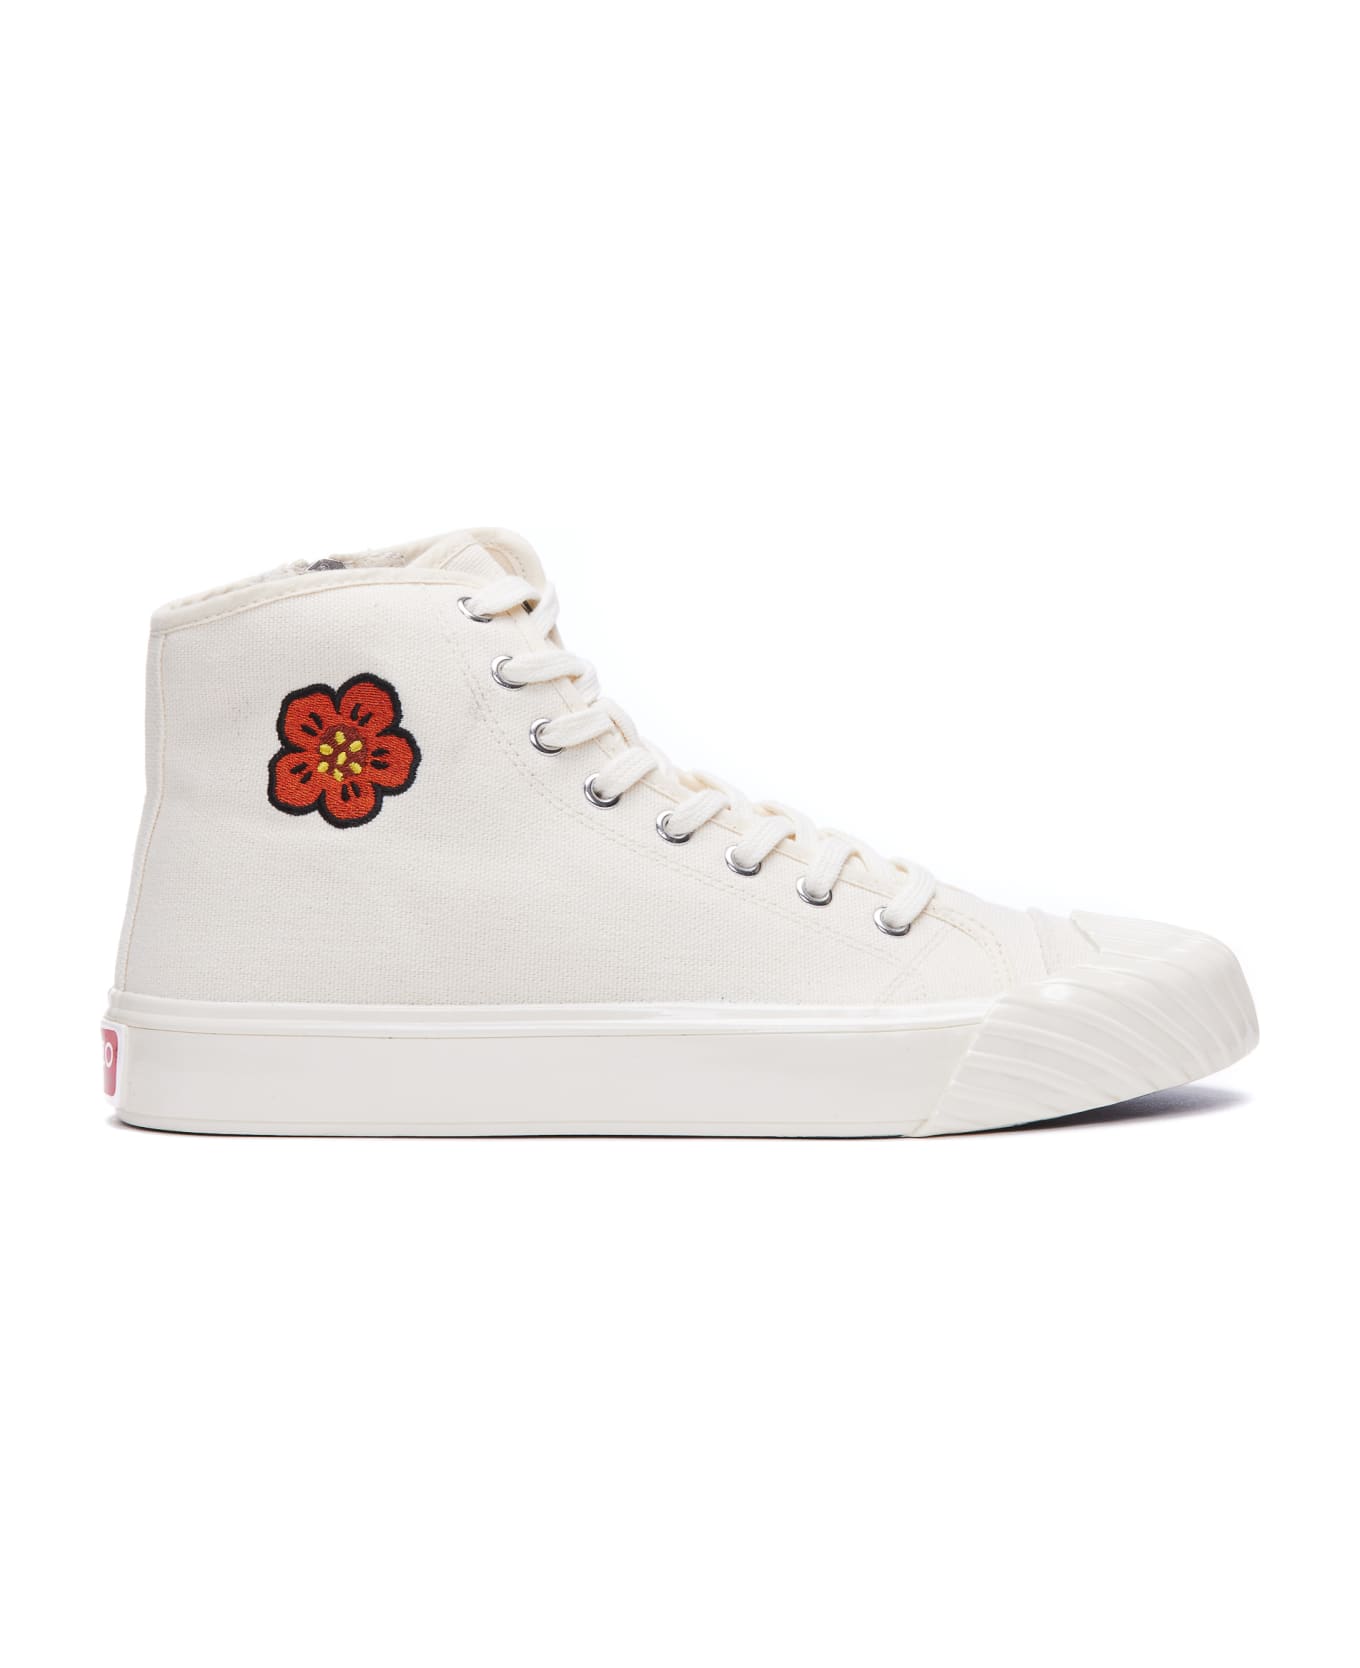 Kenzo school High Top Trainers Sneakers - White